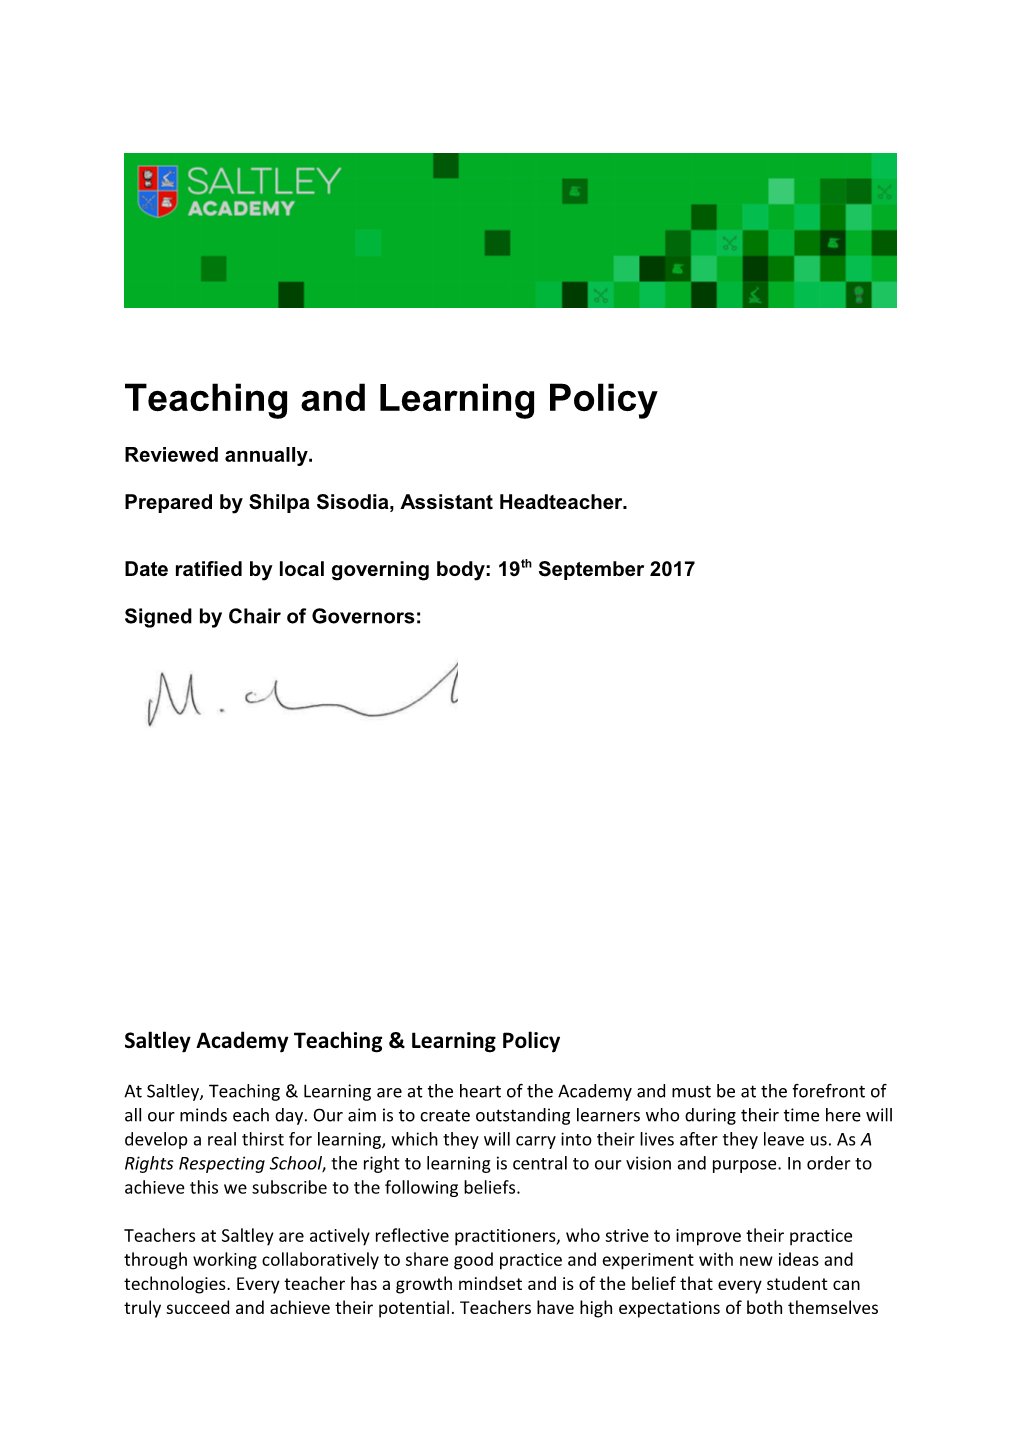 Teaching and Learning Policy s2